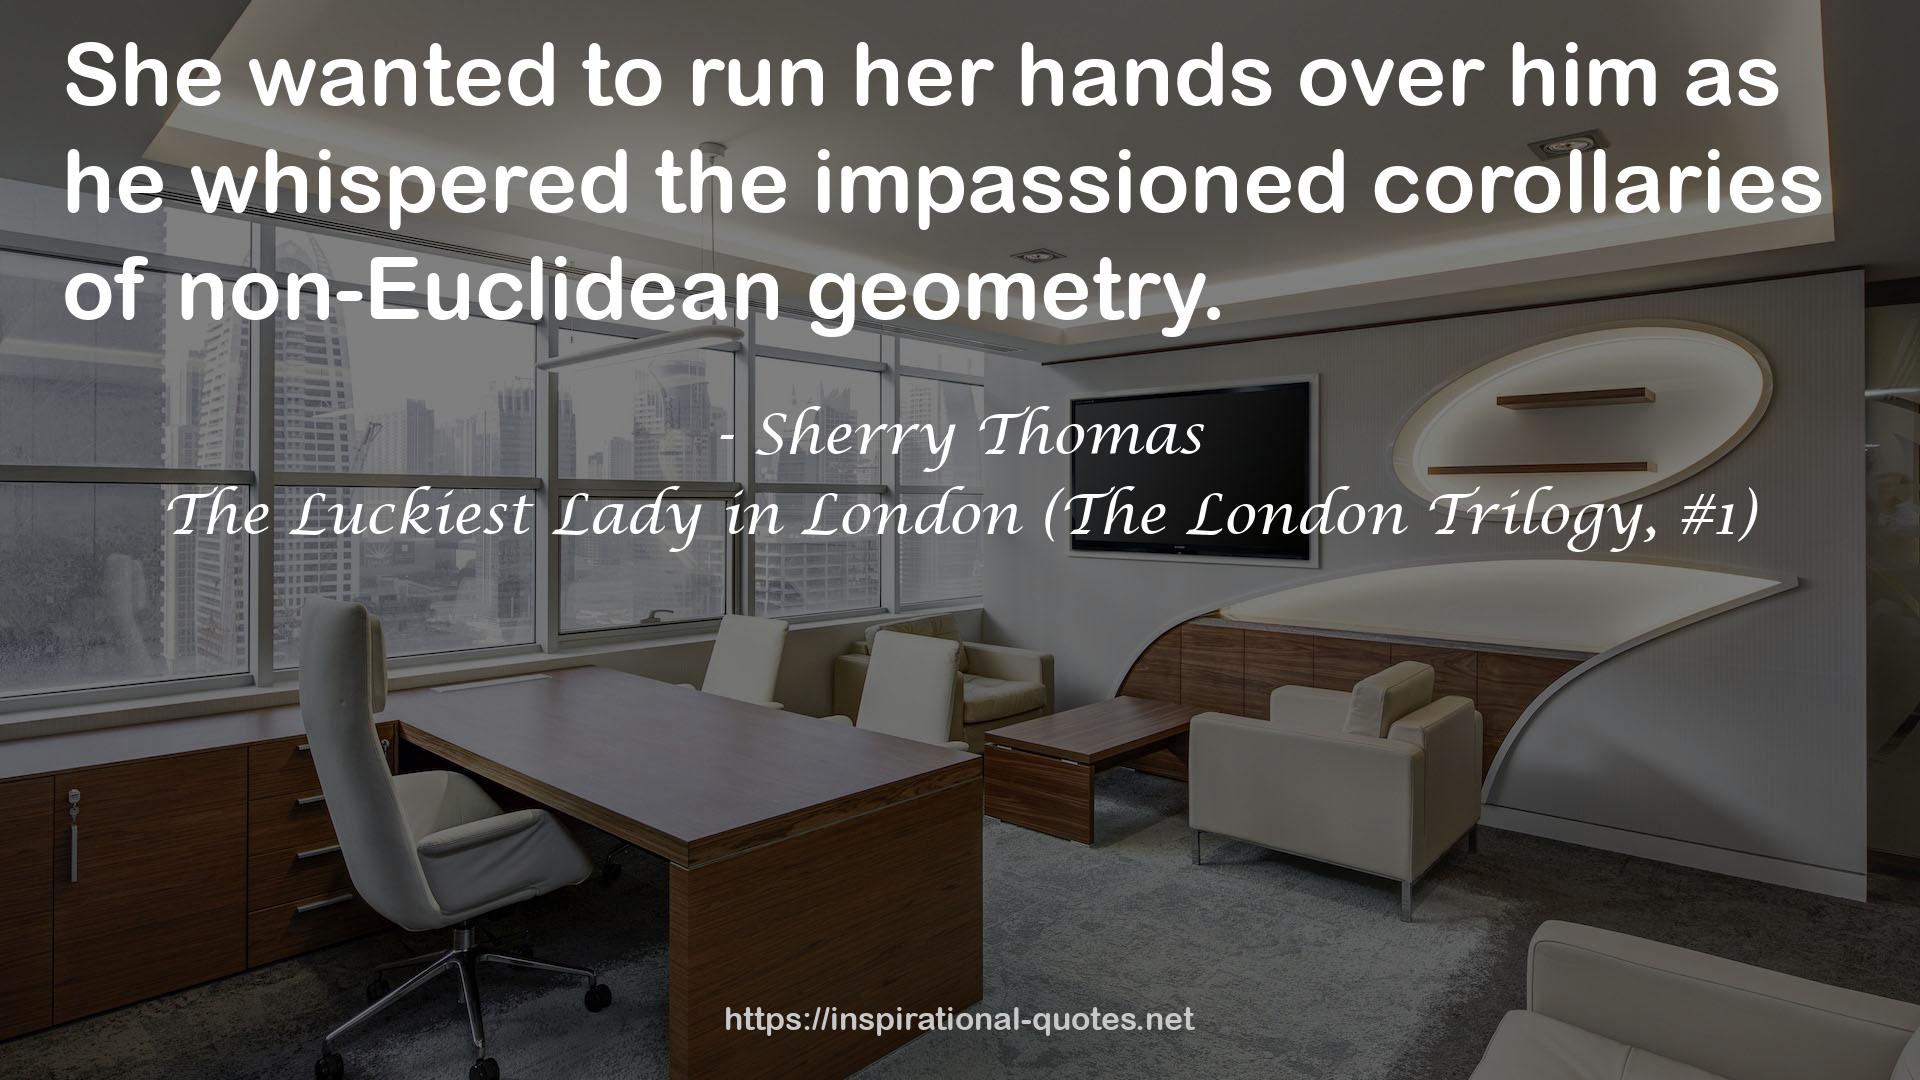 The Luckiest Lady in London (The London Trilogy, #1) QUOTES